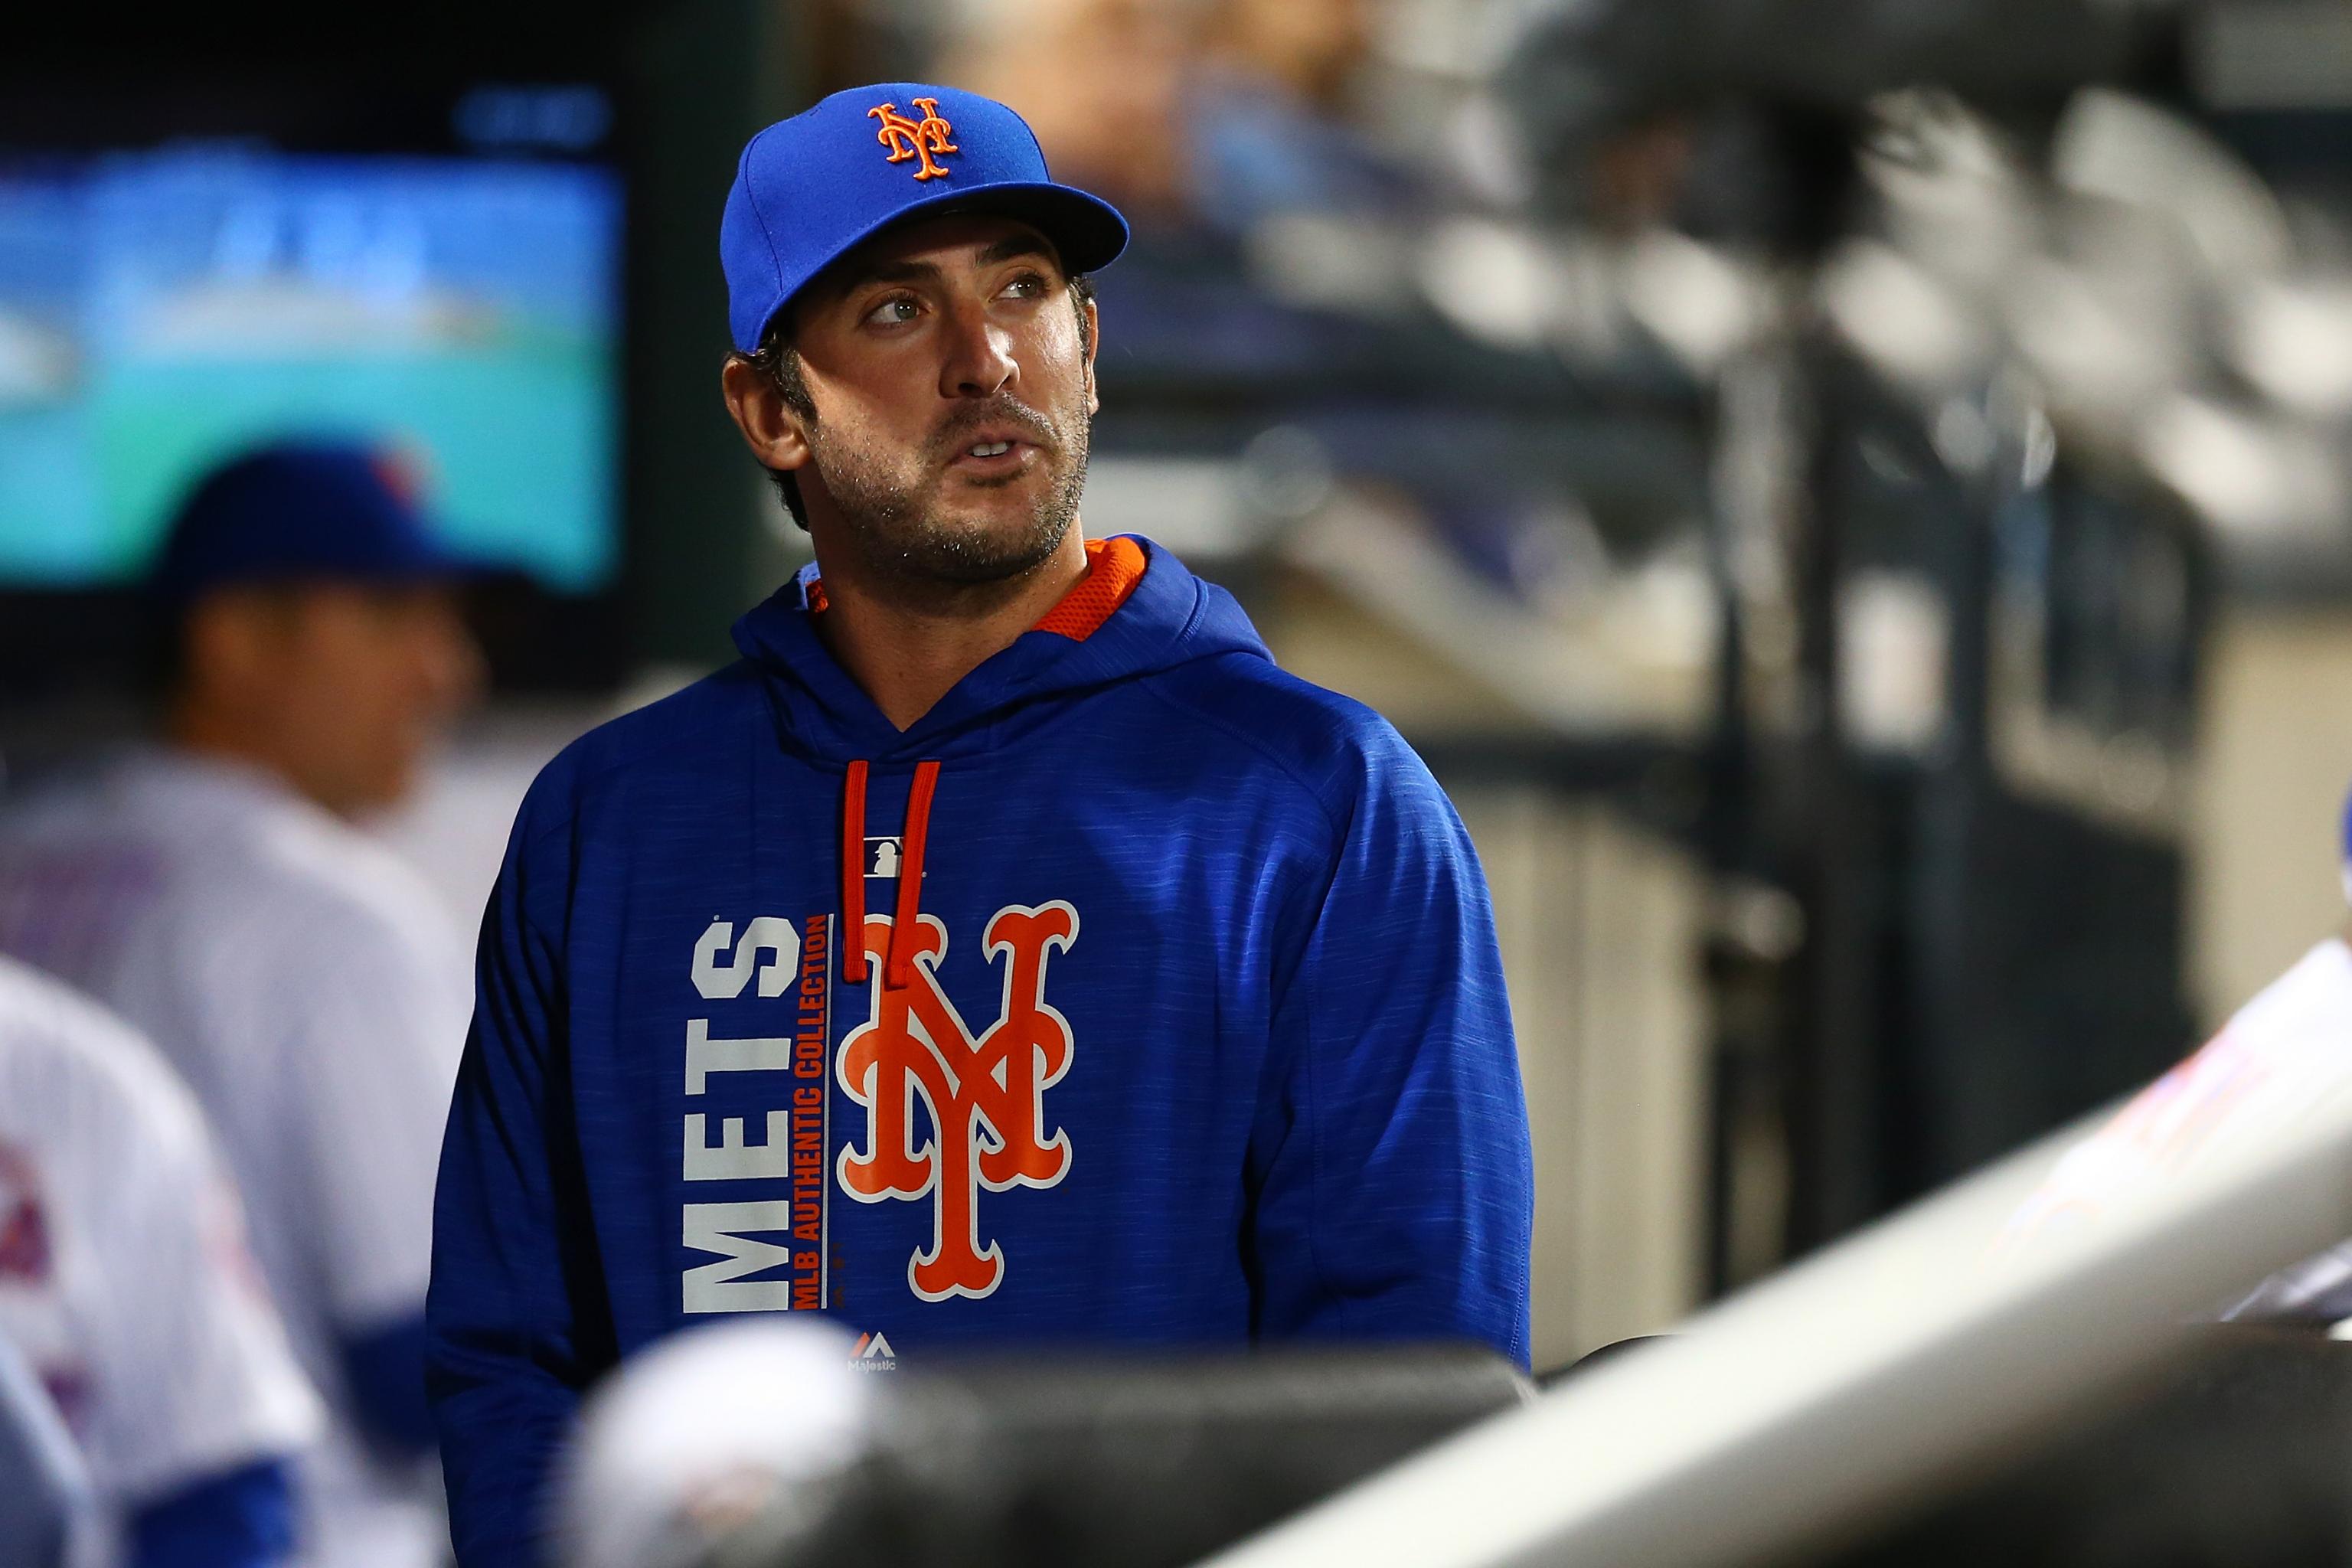 Where will Matt Harvey end up after the NY Mets?